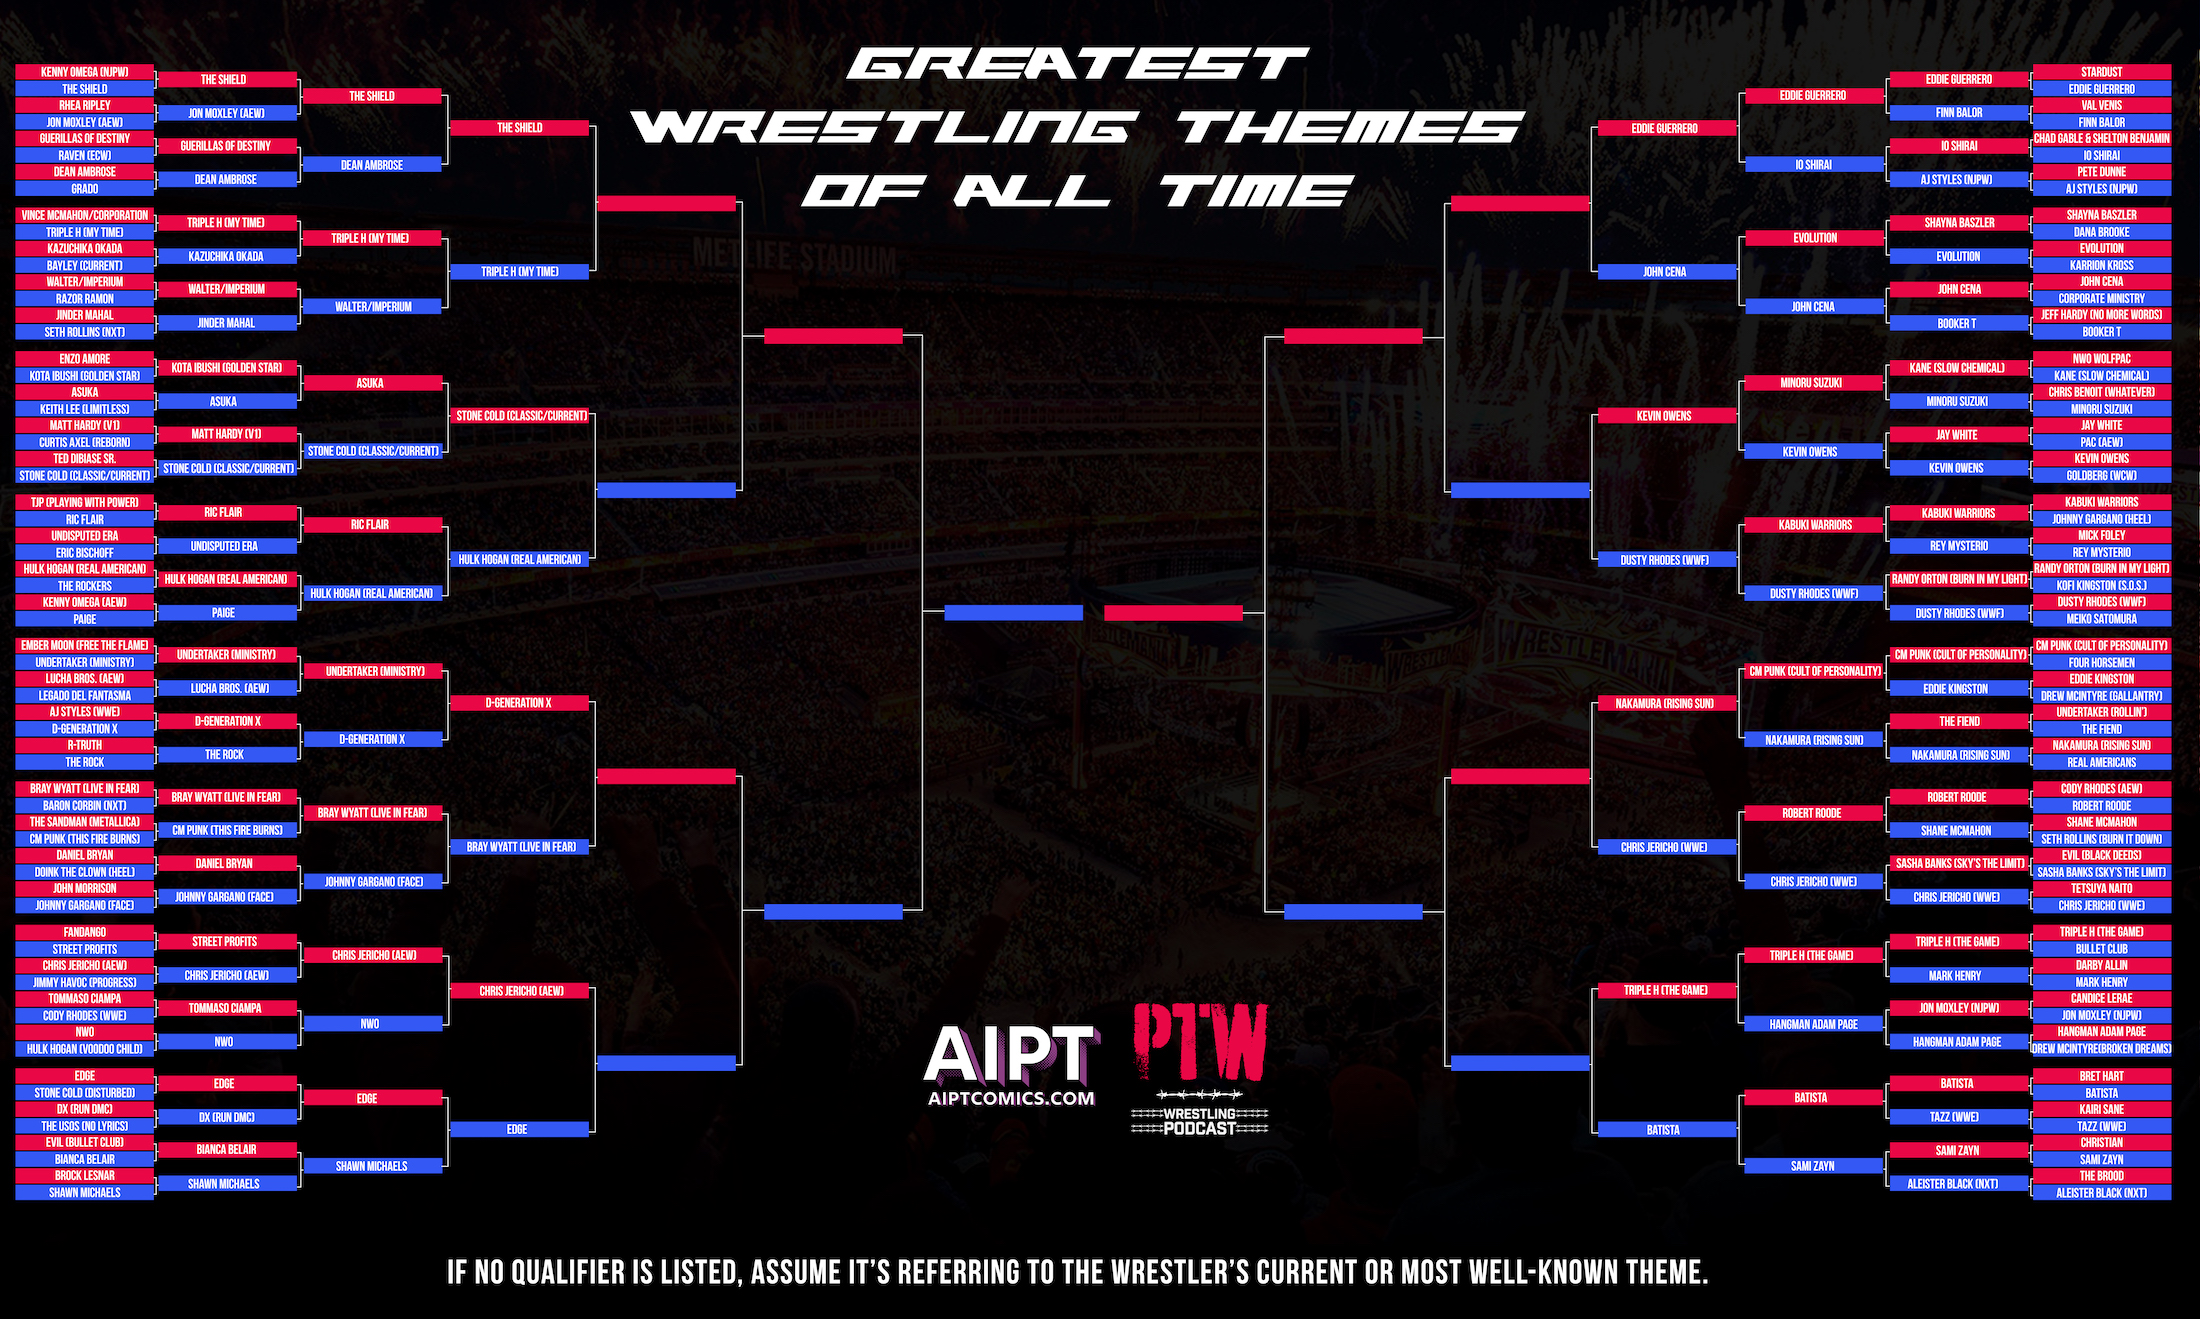 The Greatest Wrestling Themes of All Time: Round 3 results